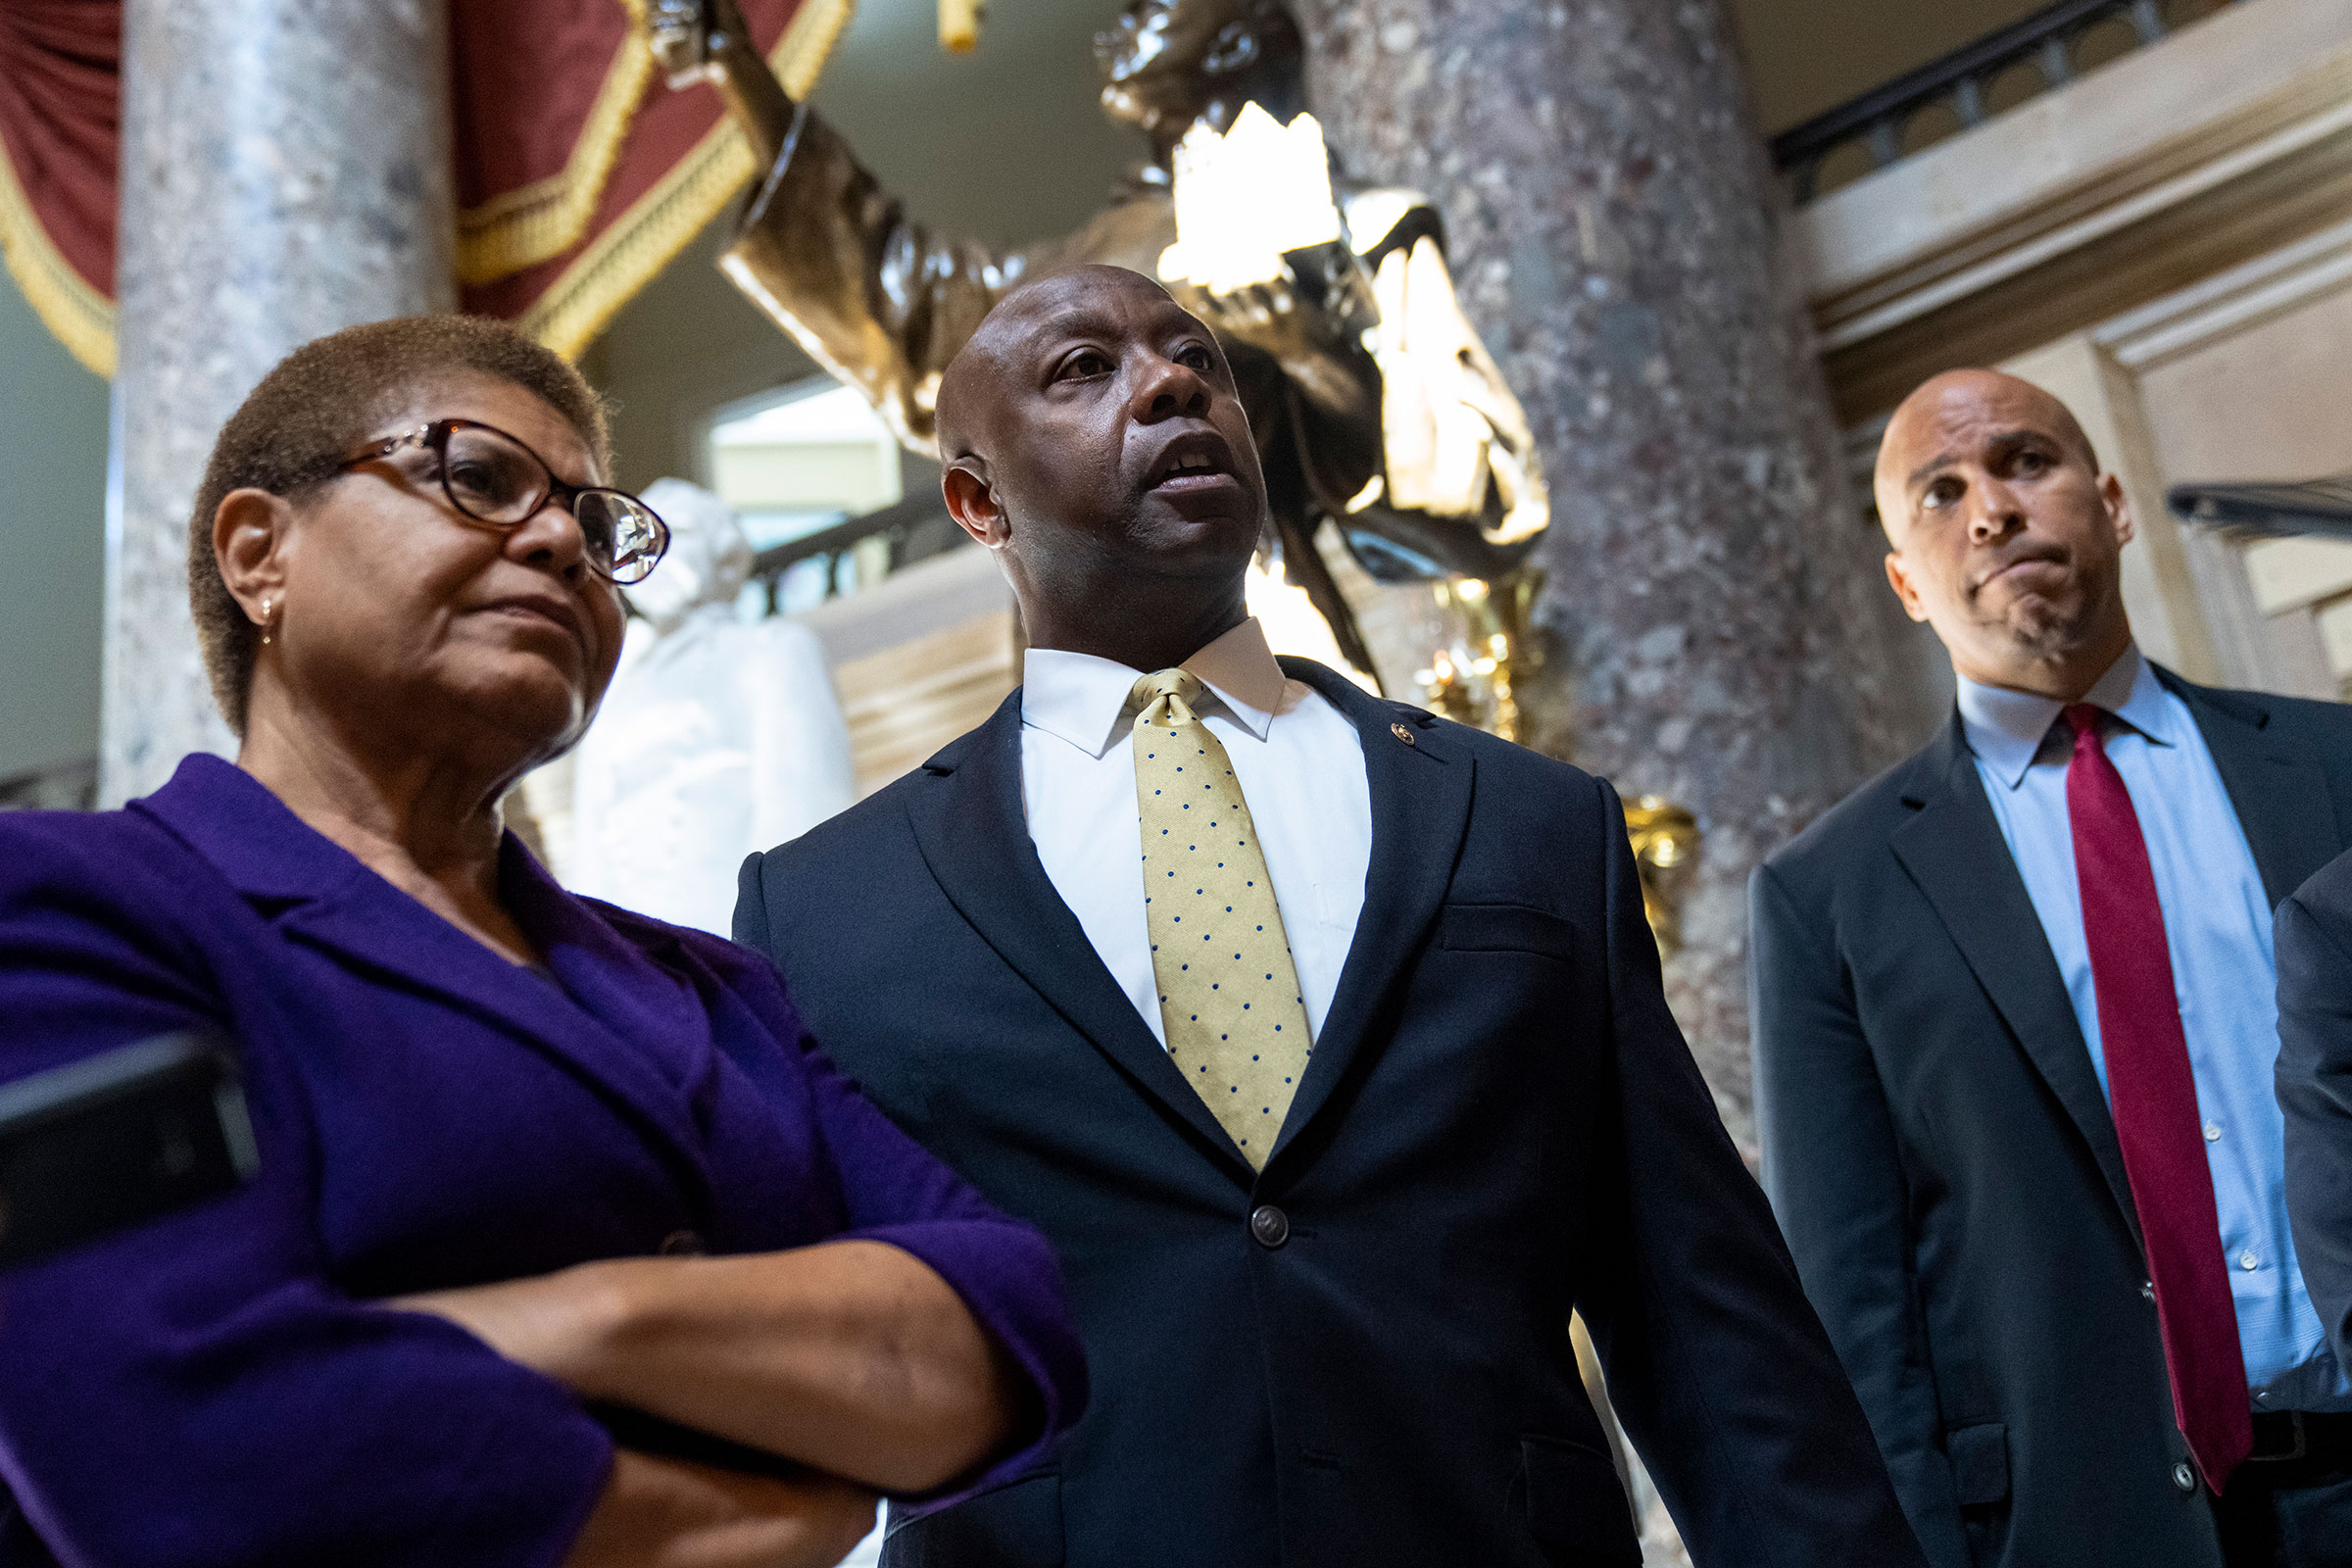 Rep. Karen Bass, Sen. Tim Scott, and Sen. Cory Booker speak briefly to reporters as they exit the office of Rep. James Clyburn following a meeting about police reform legislation on Capitol Hill on May 18, 2021. (Drew Angerer—Getty Images)